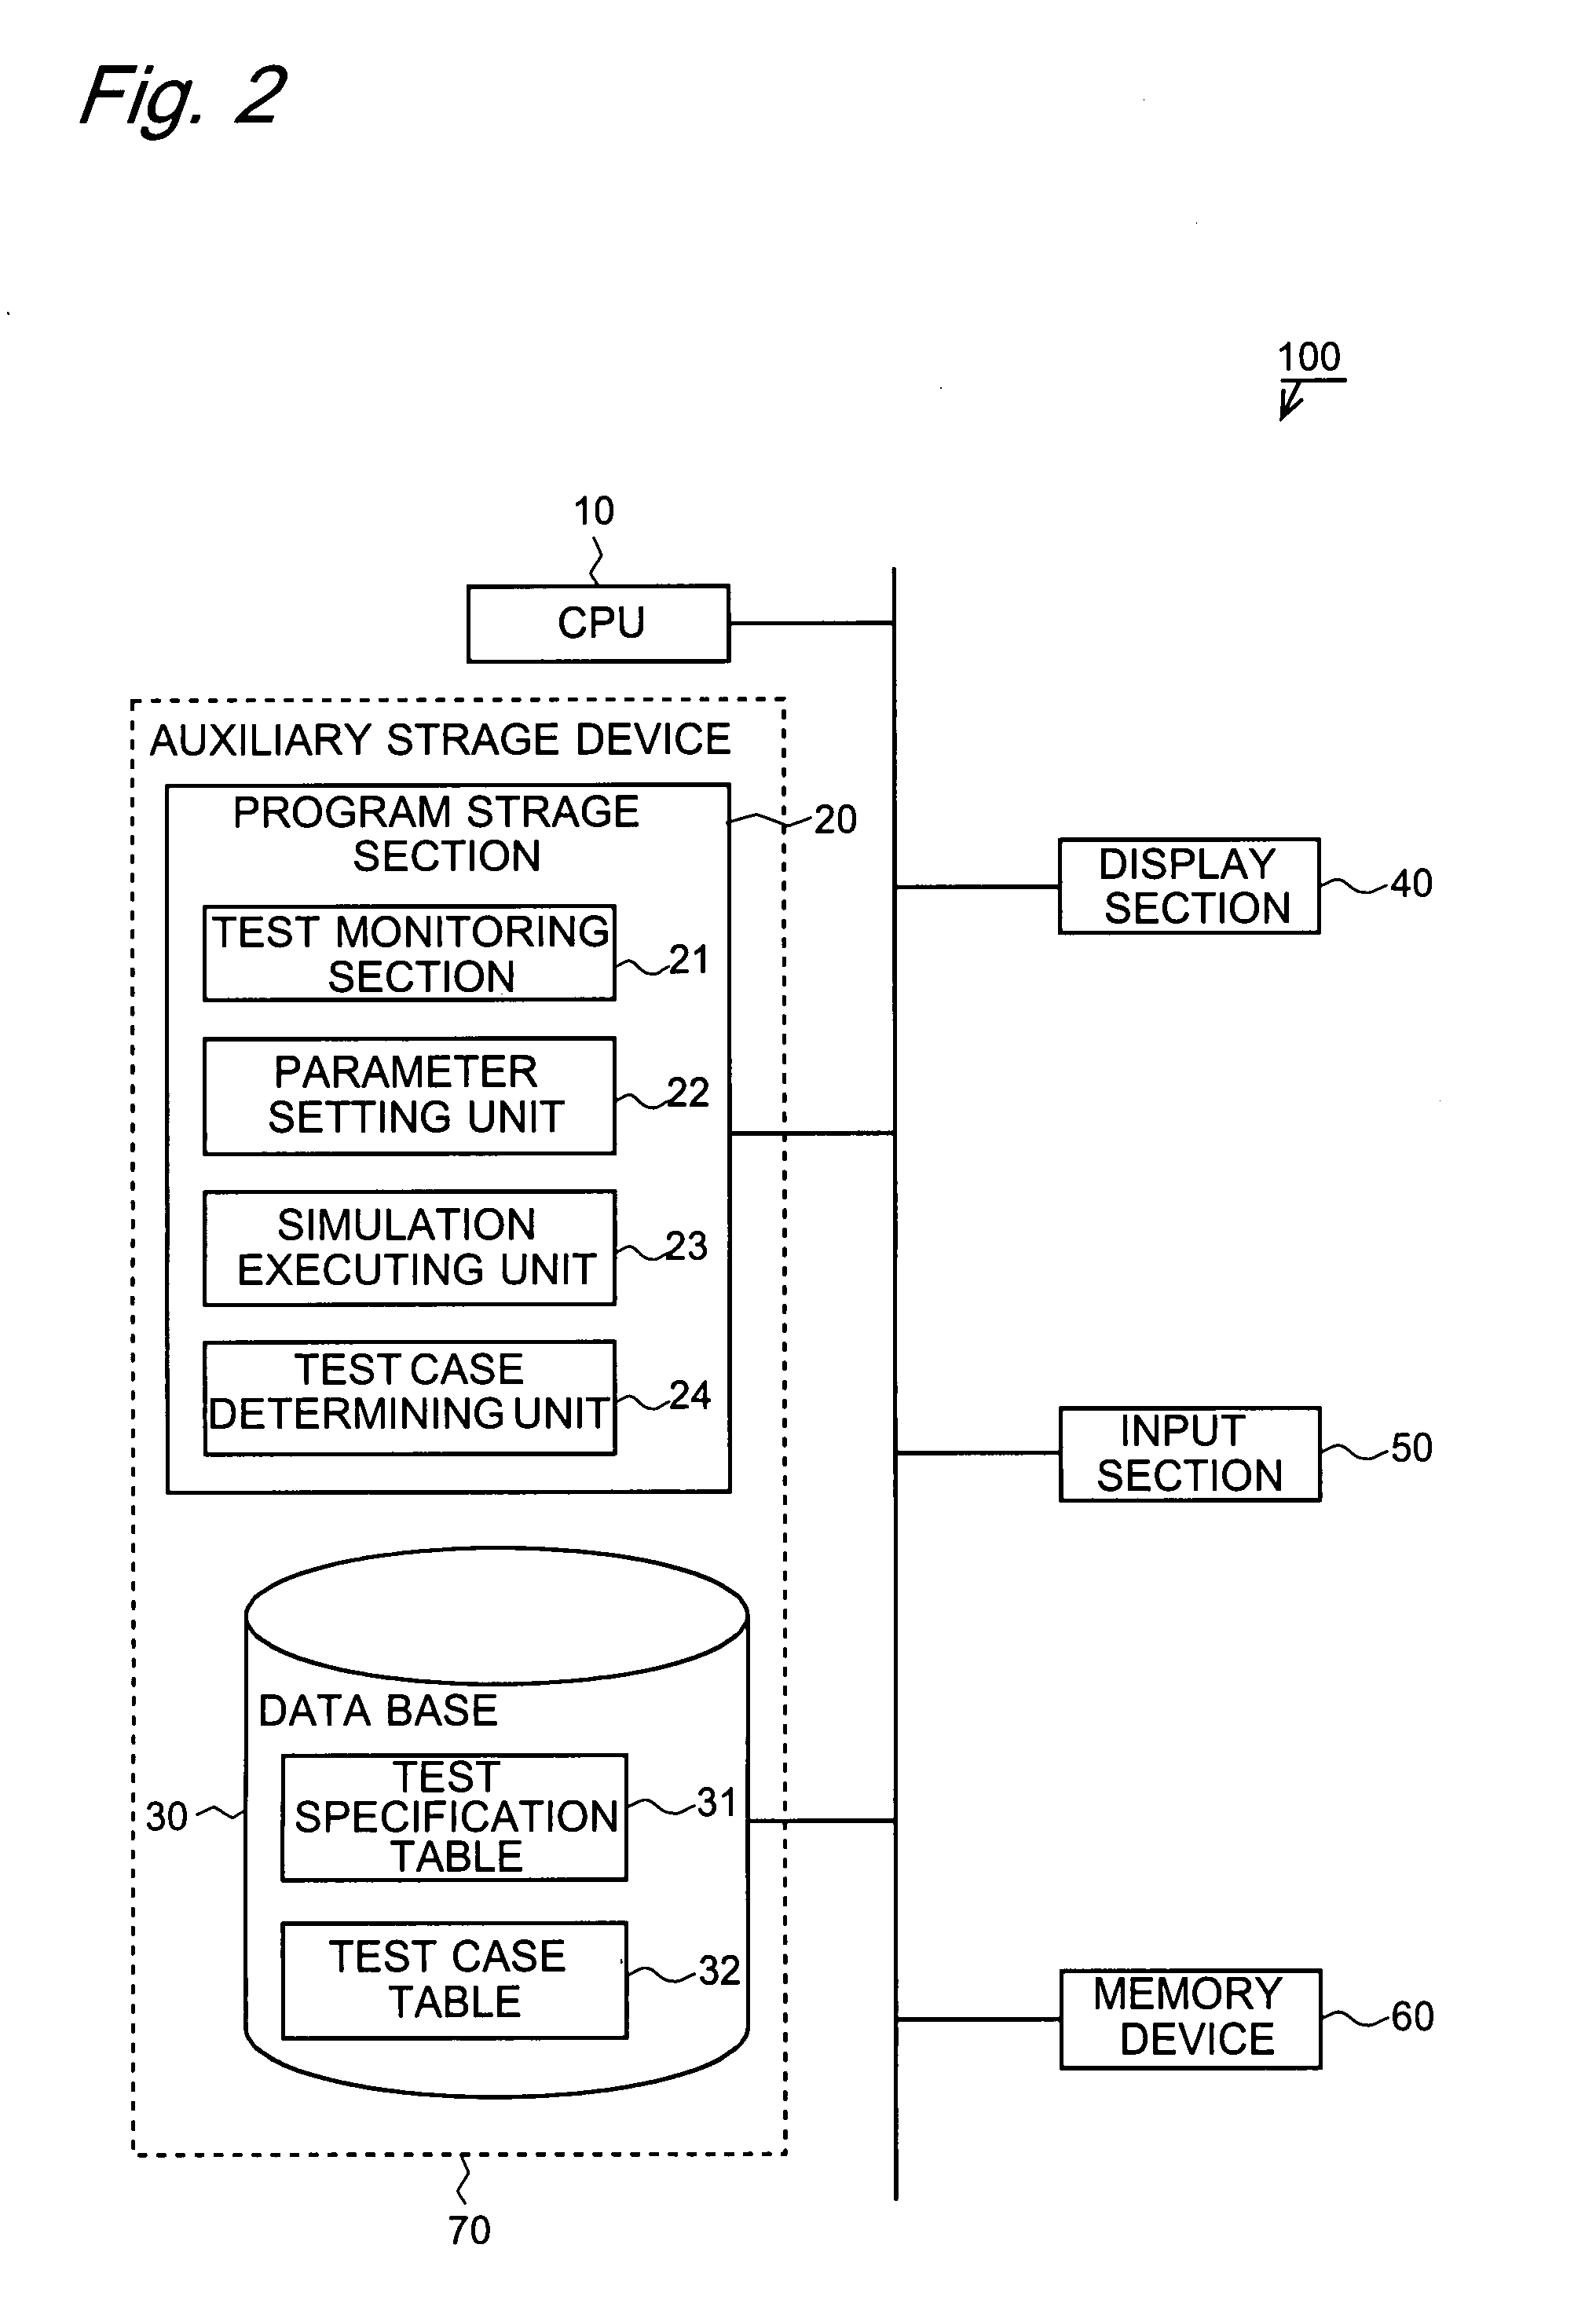 Test case selection apparatus and method, and recording medium